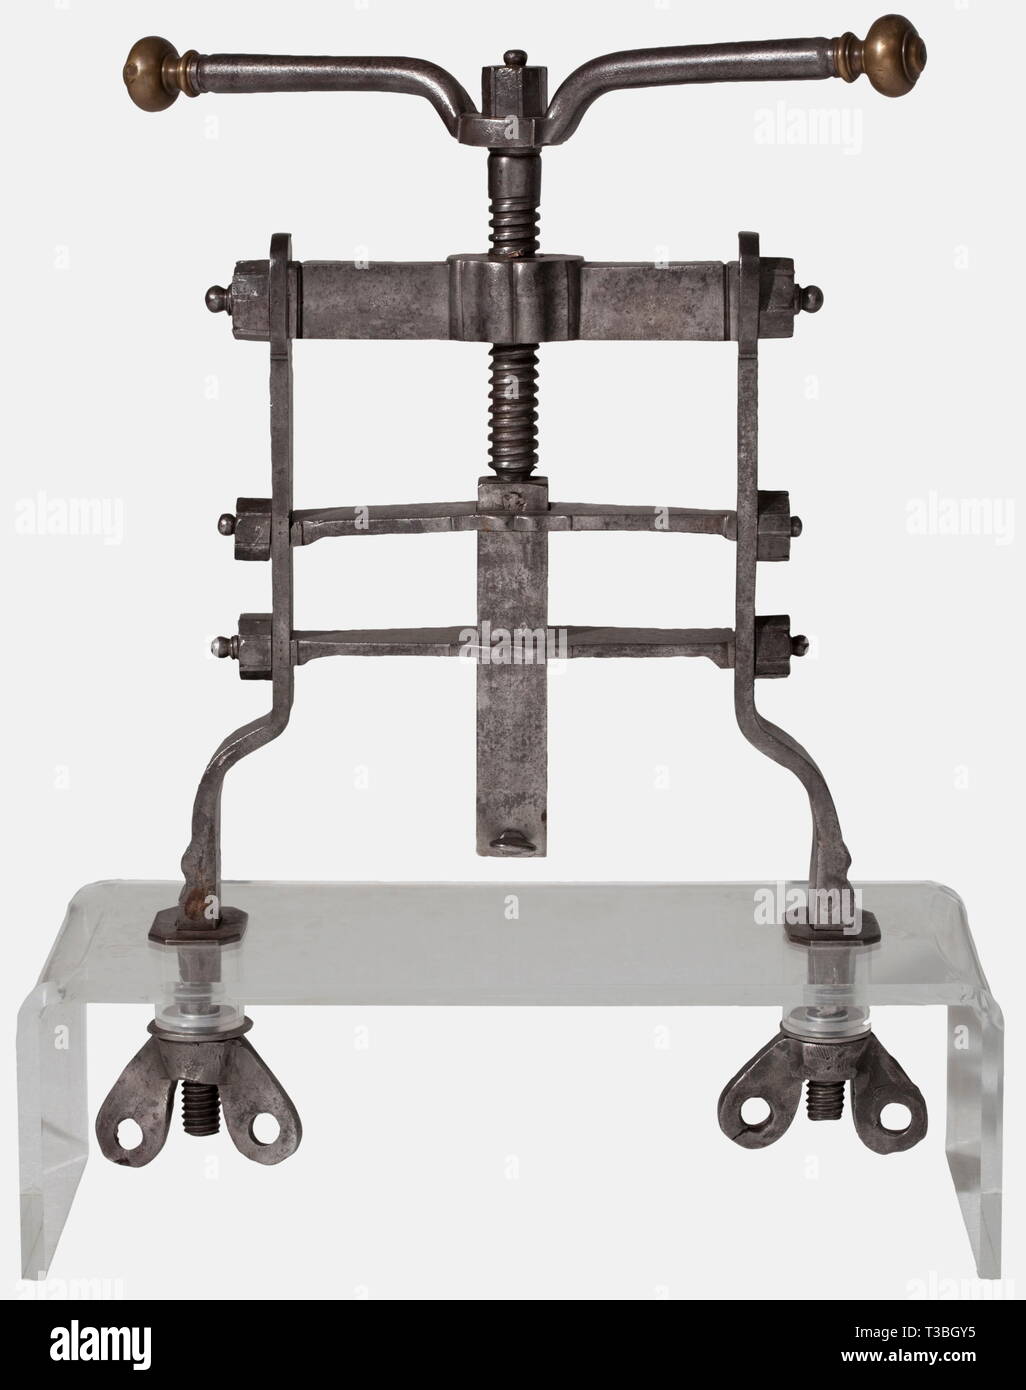 A large French seal press, circa 1700 Heavy frame of forged iron bars bolted together with nuts. Central vertical threaded rod, the handle bar with spherical brass finials. The lower end of the ram fitted with a receiver for signets with retaining screw. At the bottom ends of the frame two stud bolts with large thumb nuts for table top mounting. Mounted on a modern acrylic glass stand. Height 51 cm, width 42 cm. historic, historical, 18th century, handicrafts, handcraft, craft, object, objects, stills, clipping, clippings, cut out, cut-out, cut-o, Additional-Rights-Clearance-Info-Not-Available Stock Photo